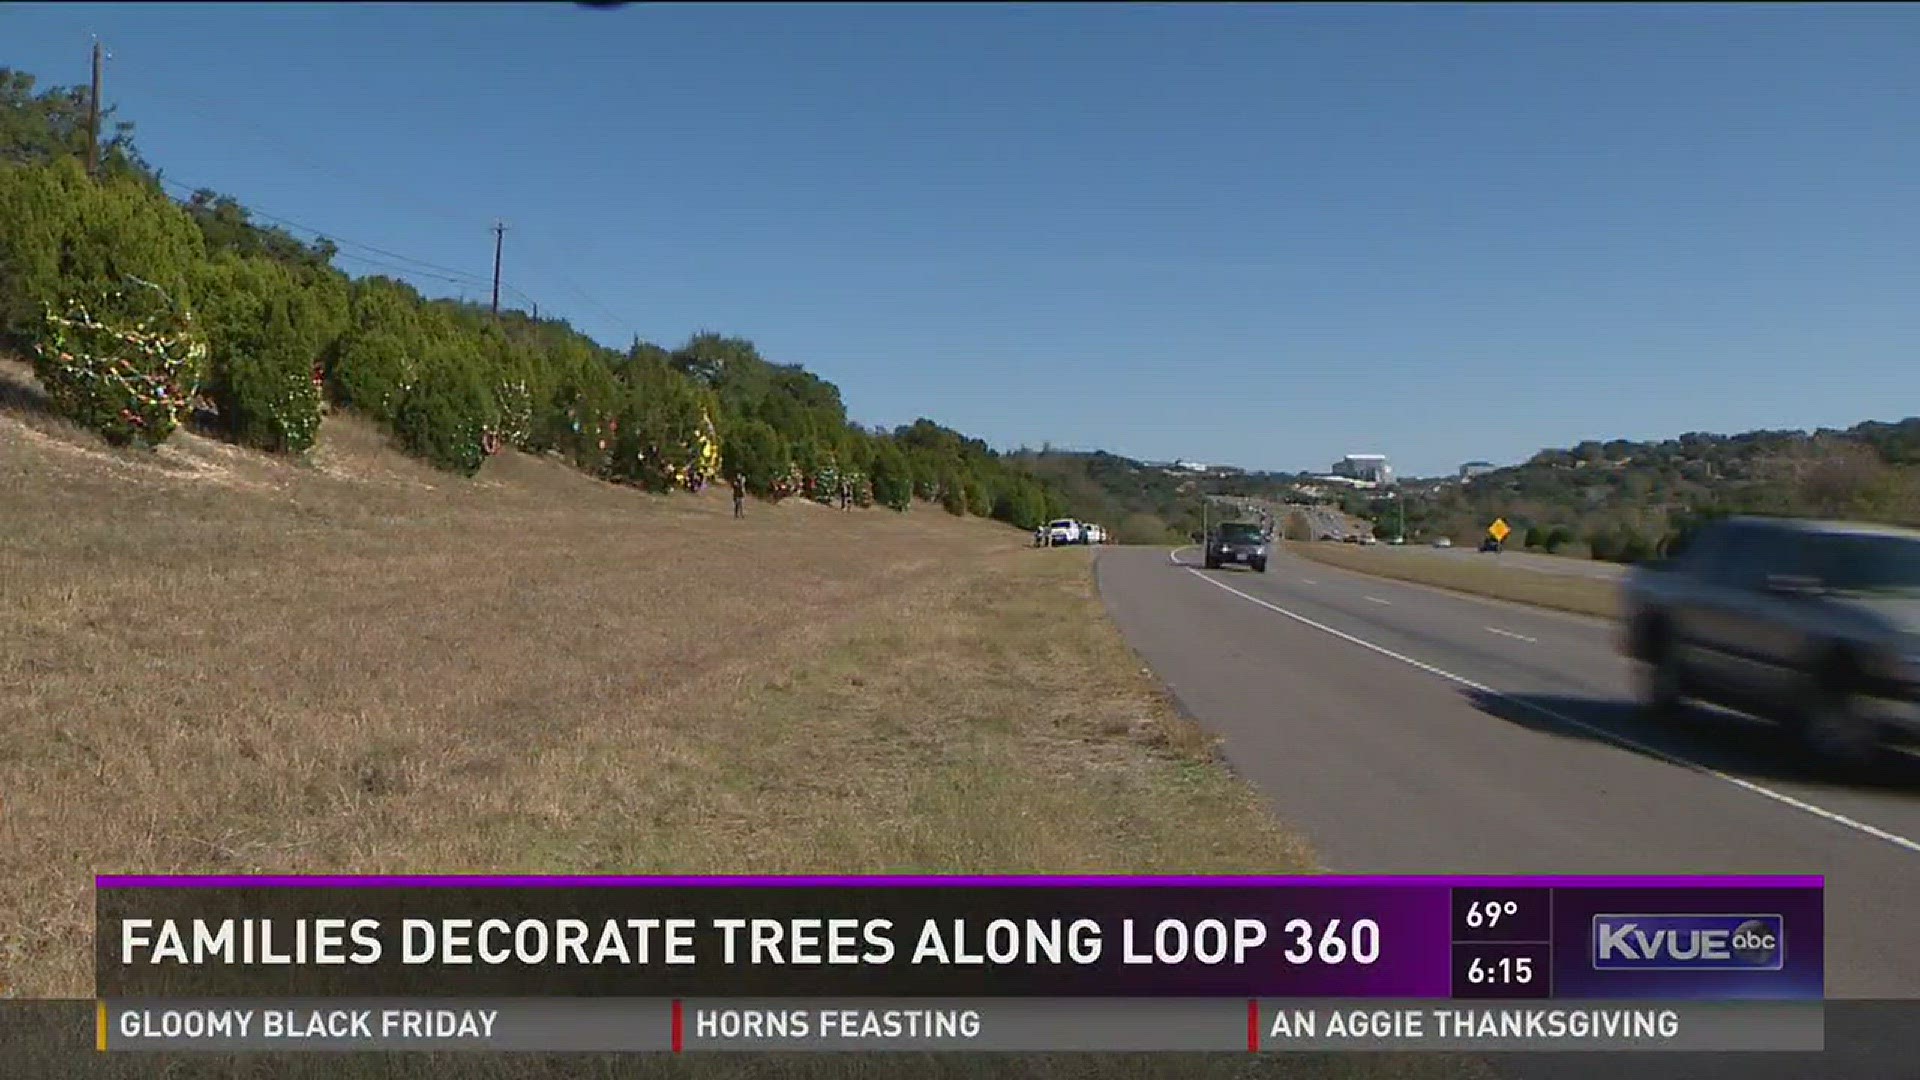 Families decorate trees along Loop 360